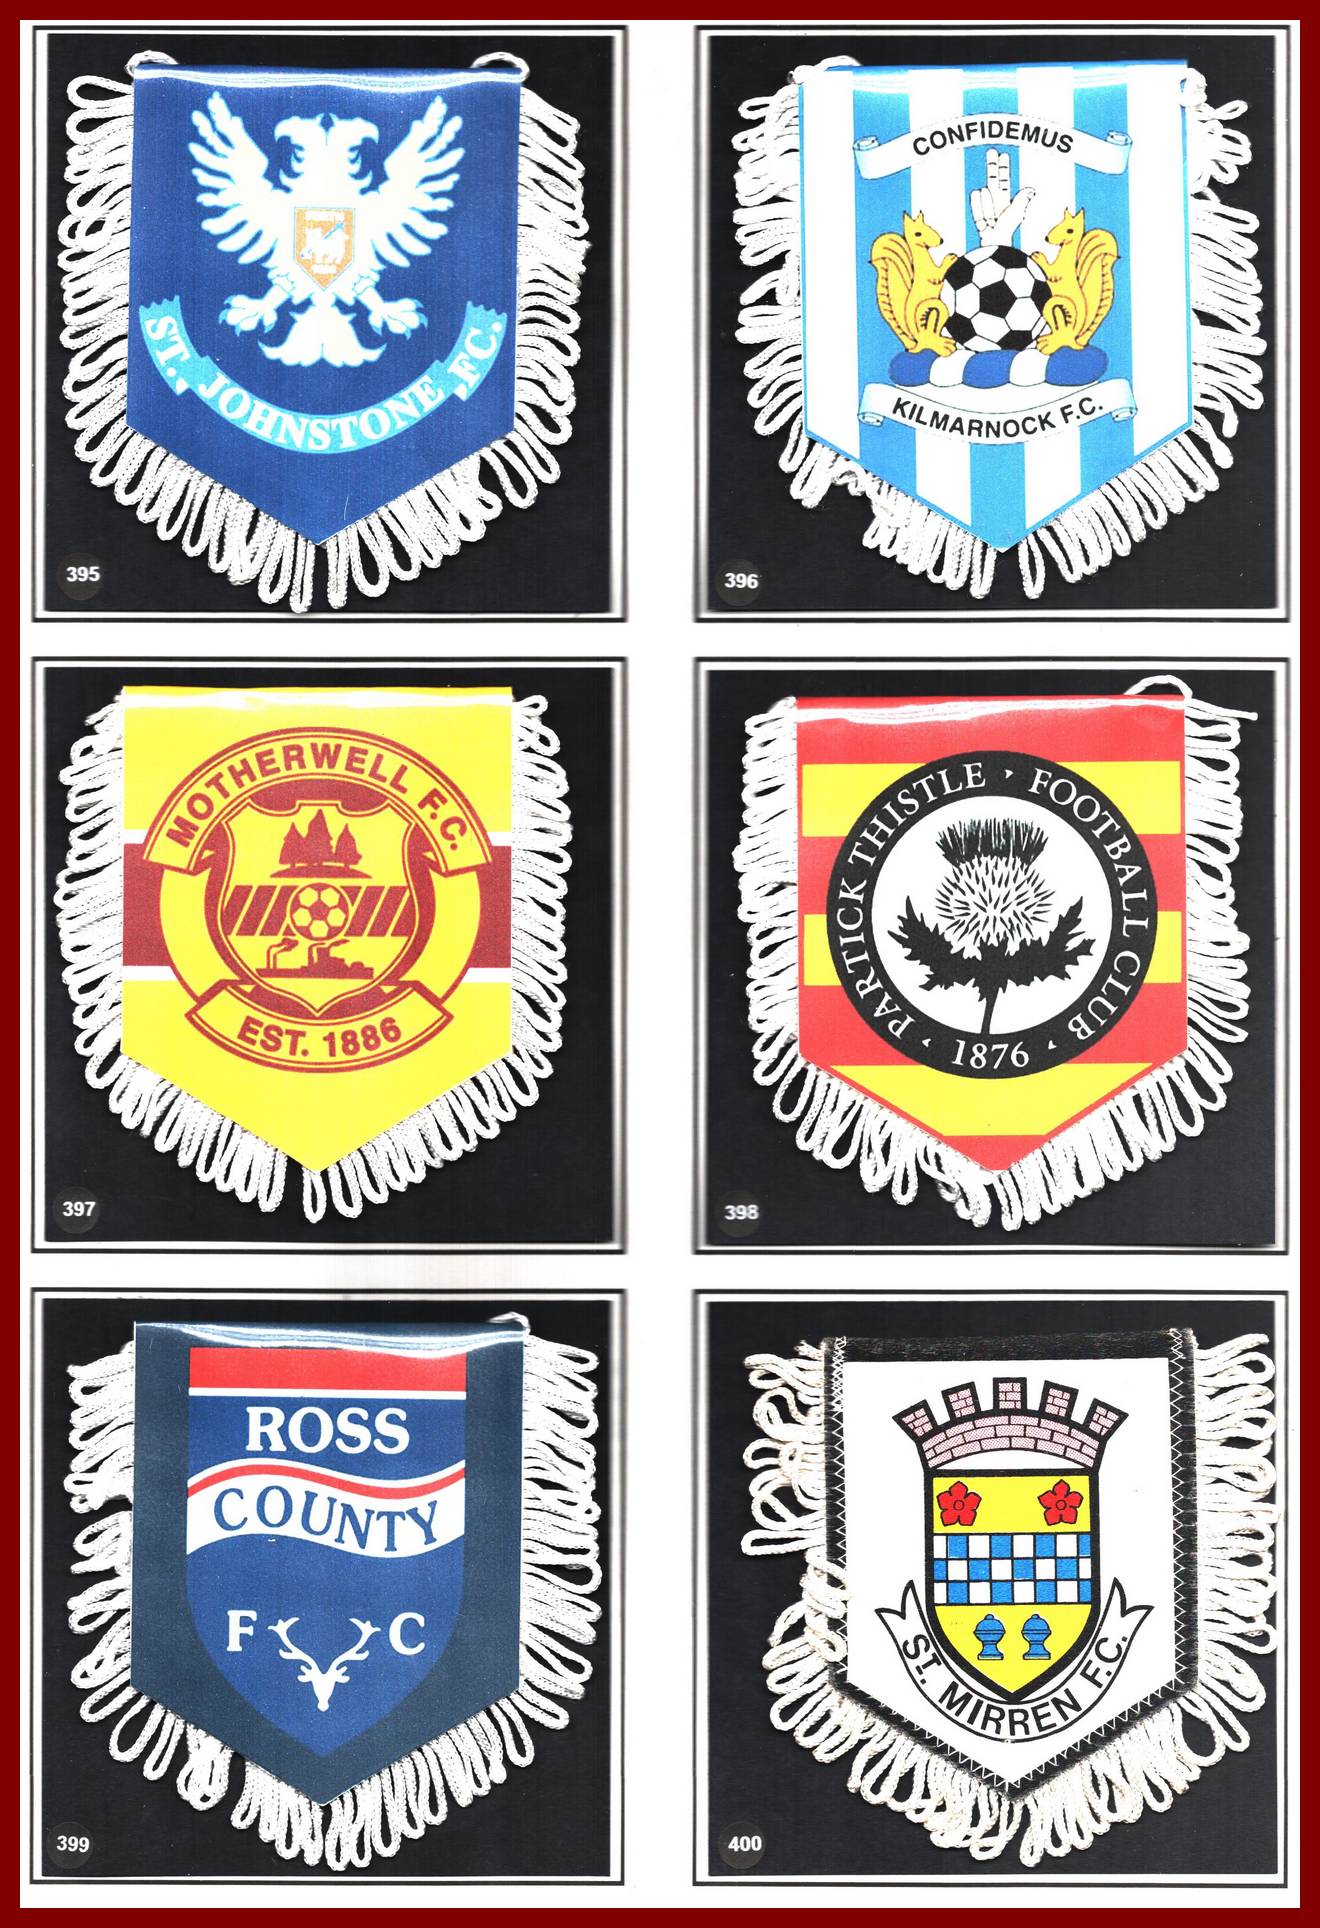 Photo 469 ECOSSE (Page 03): St Johnstone - Kilmarnock FC - Motherwell FC - Partick Thistle FC - Ross County FC - St Mirren FC